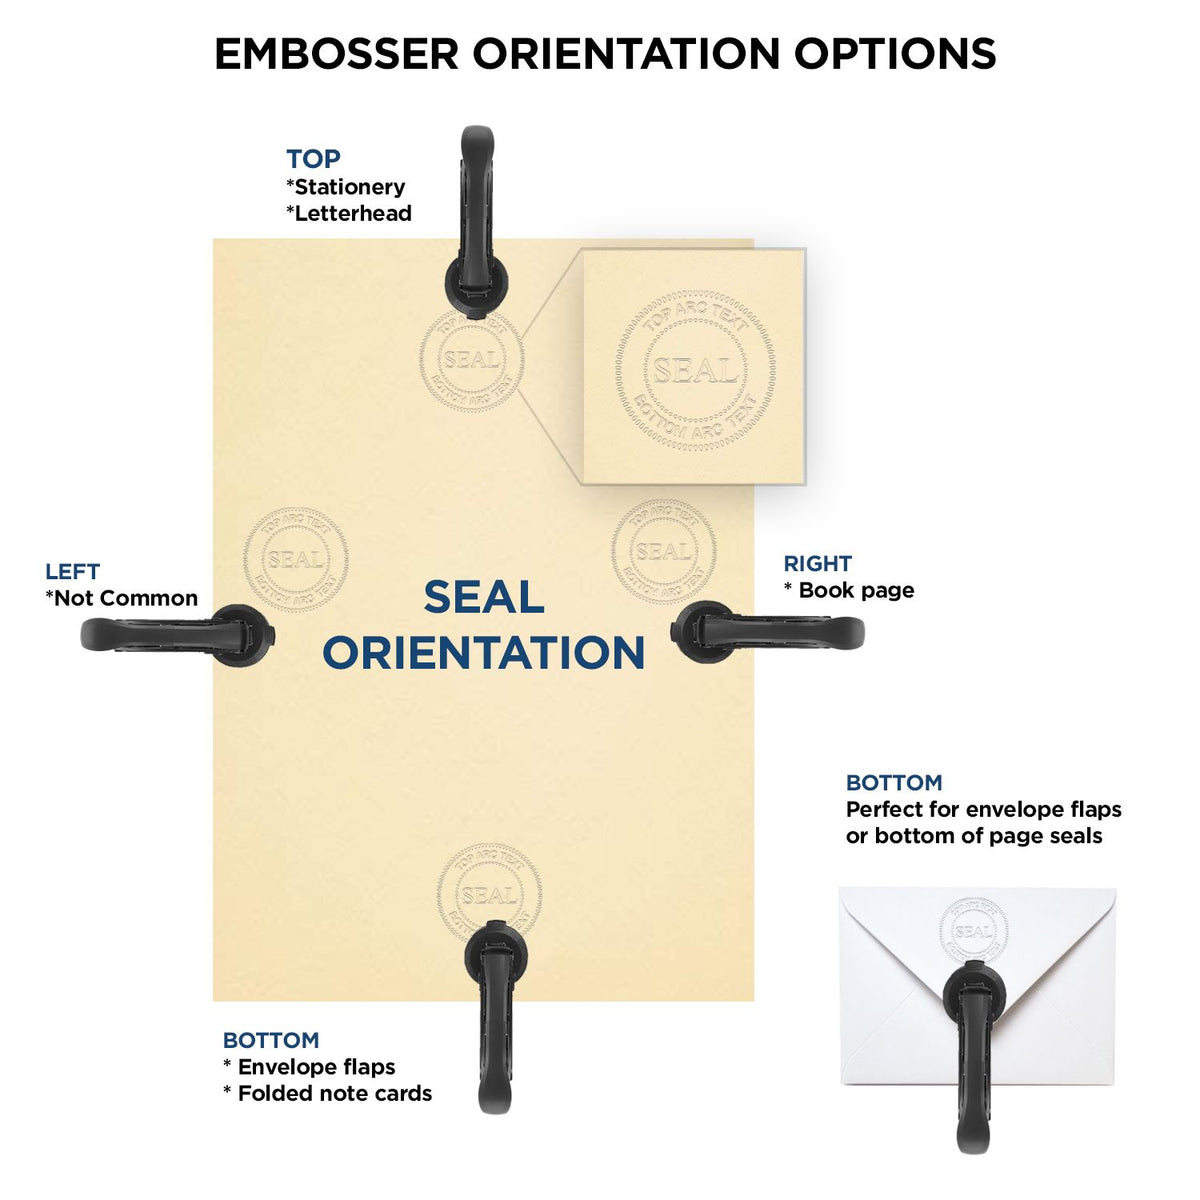 An infographic for the Handheld North Carolina Professional Engineer Embosser showing embosser orientation, this is showing examples of a top, bottom, right and left insert.